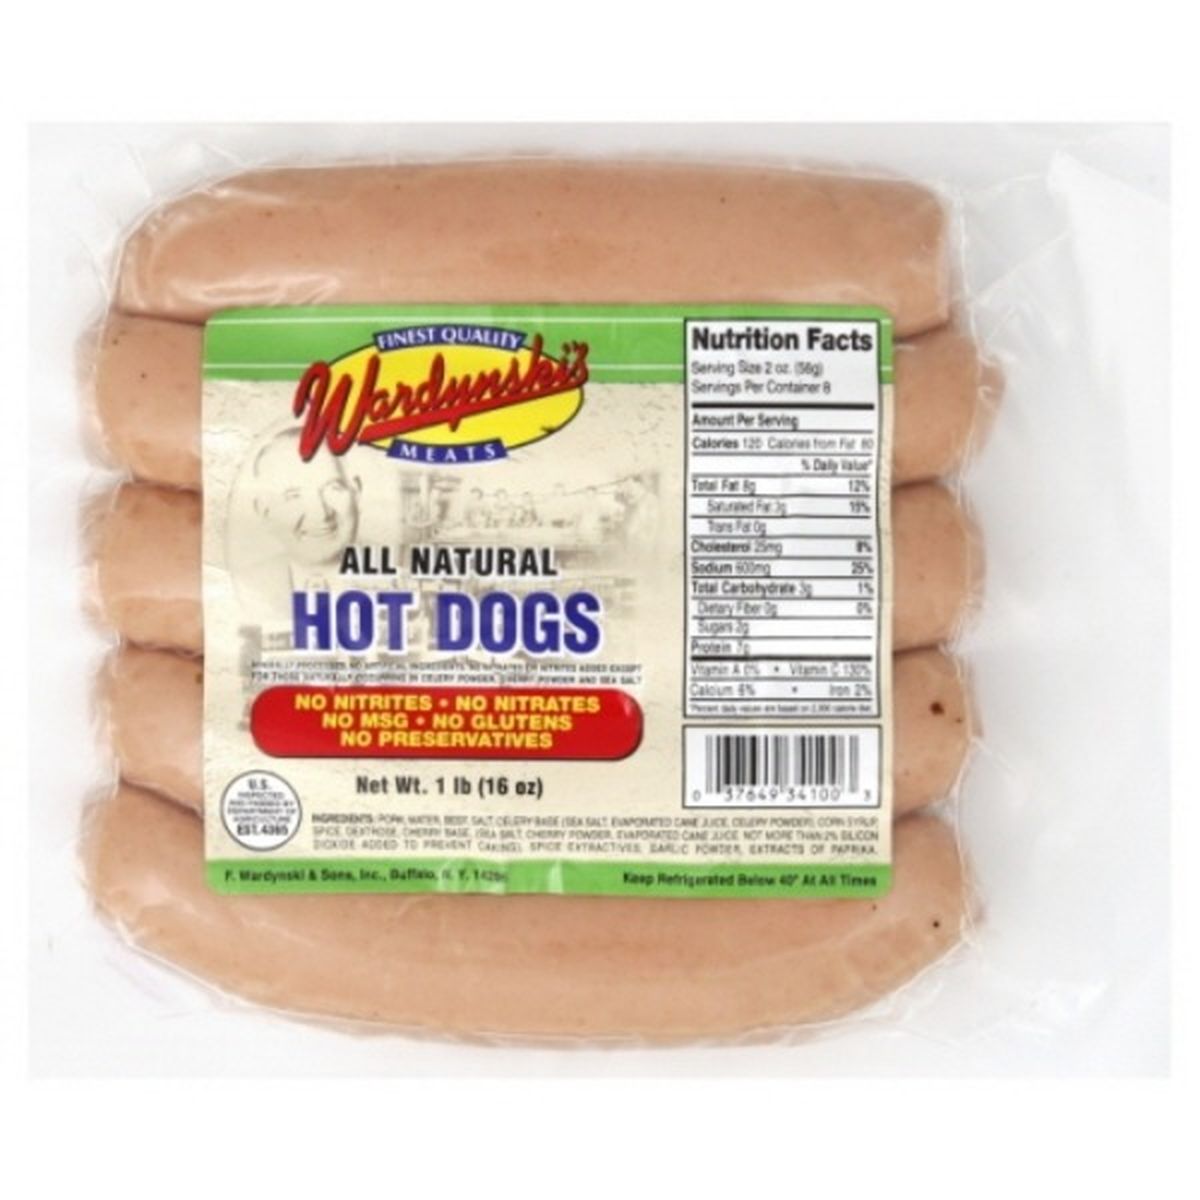 Calories in Wardynskis Hot Dogs